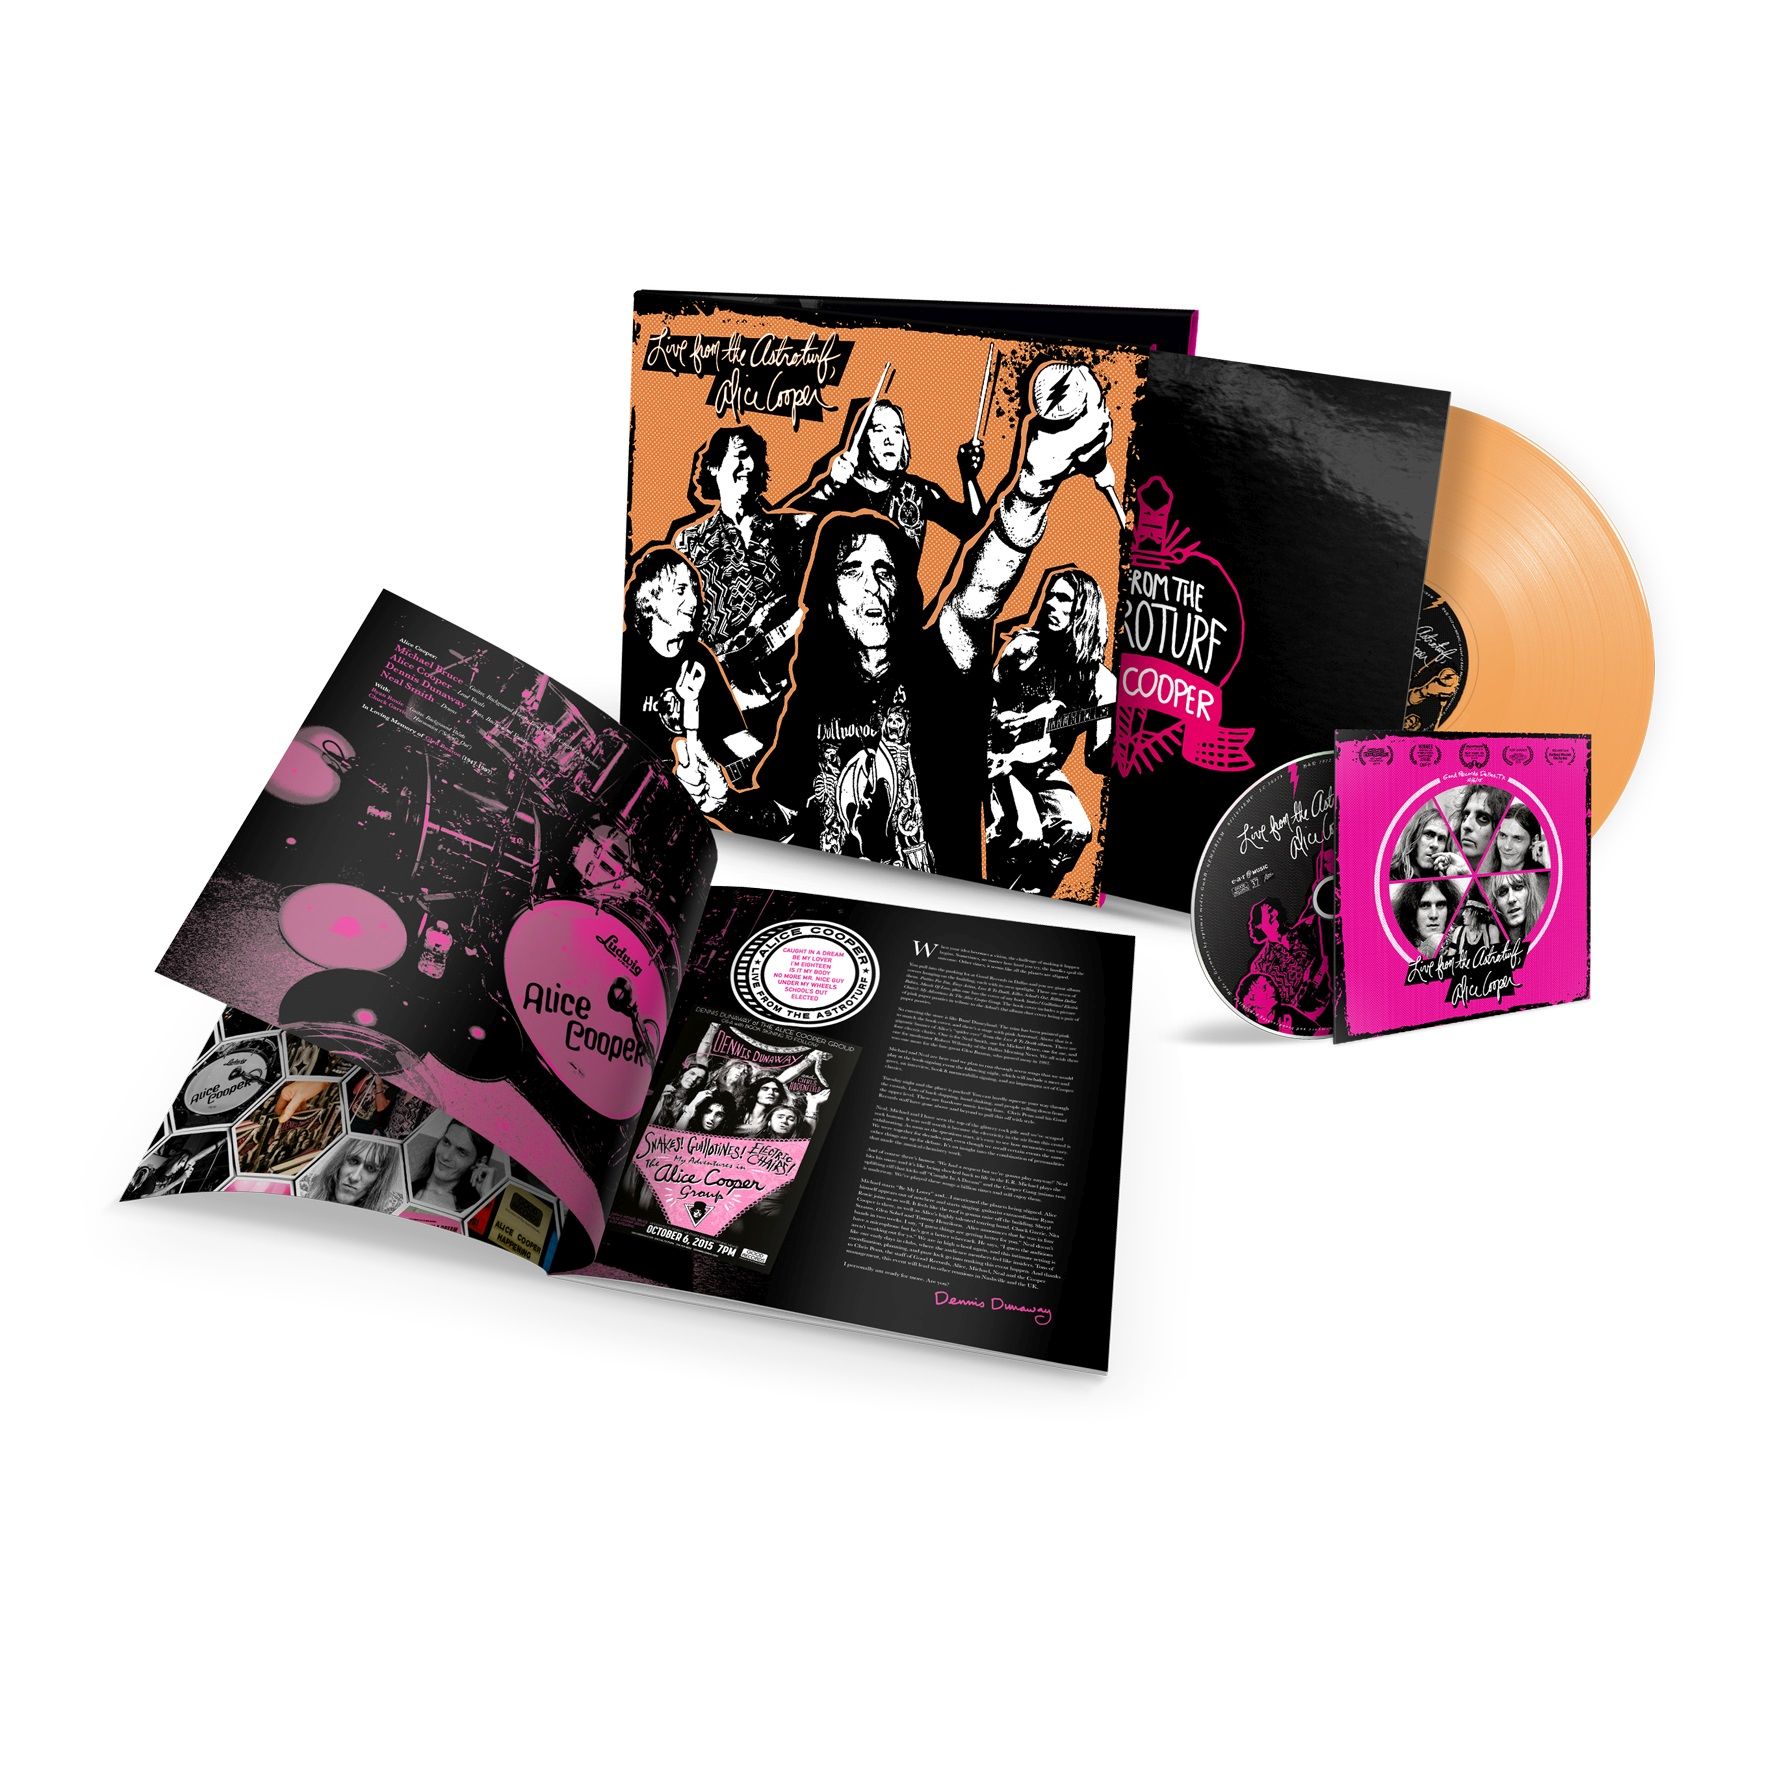 LIVE FROM THE ASTROTURF (LIMITED & NUMBERED APRICOT LP + DVD)